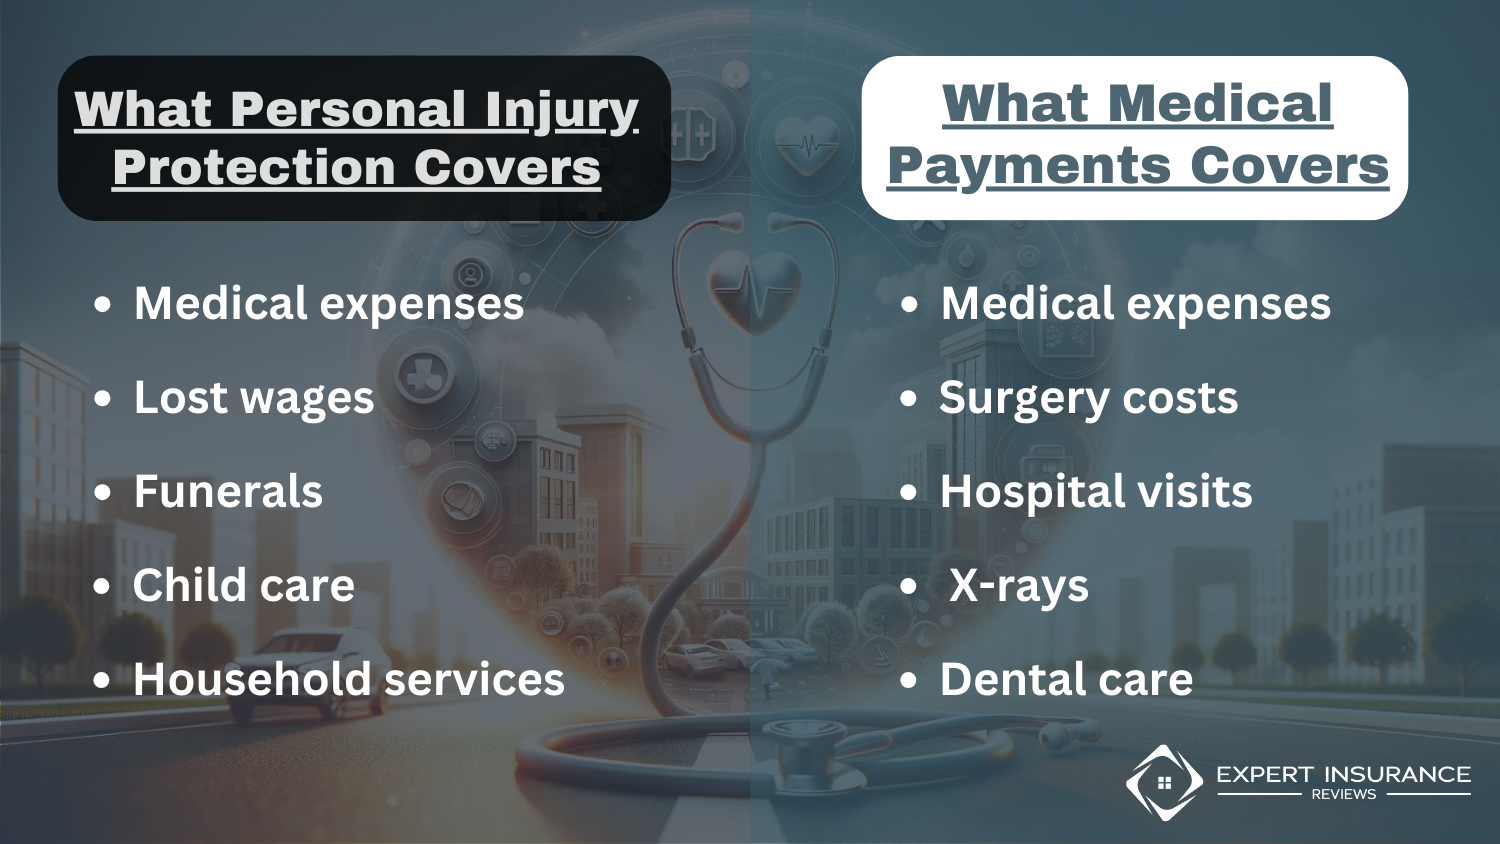 Does Nationwide cover medical bills after an accident?